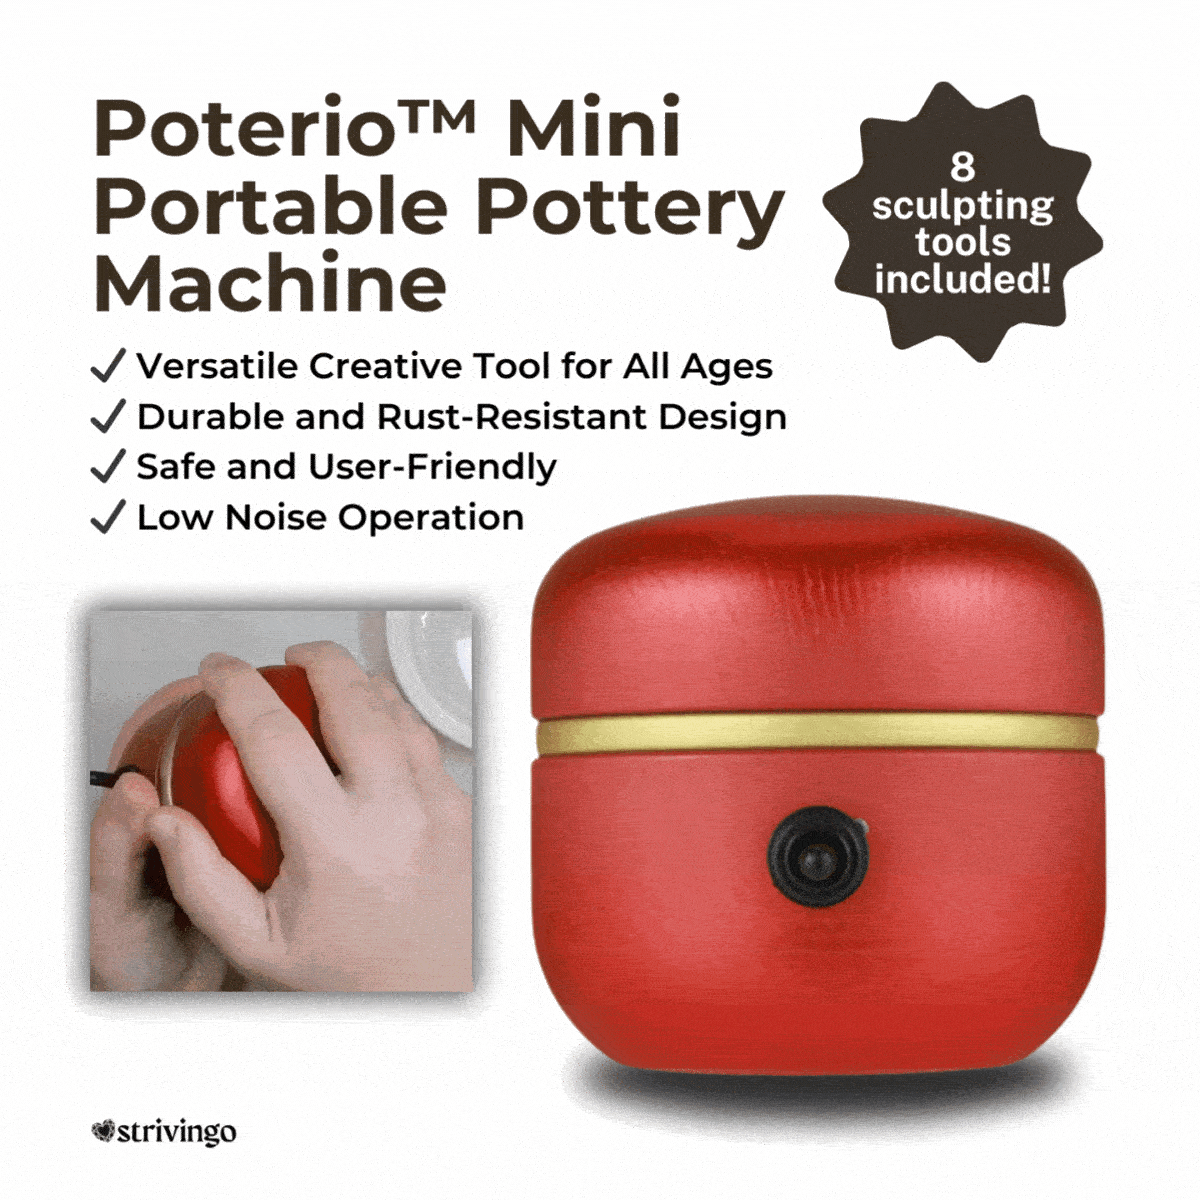 Poterio™ Mini Portable Pottery Machine | 8 Sculpting Tools Included